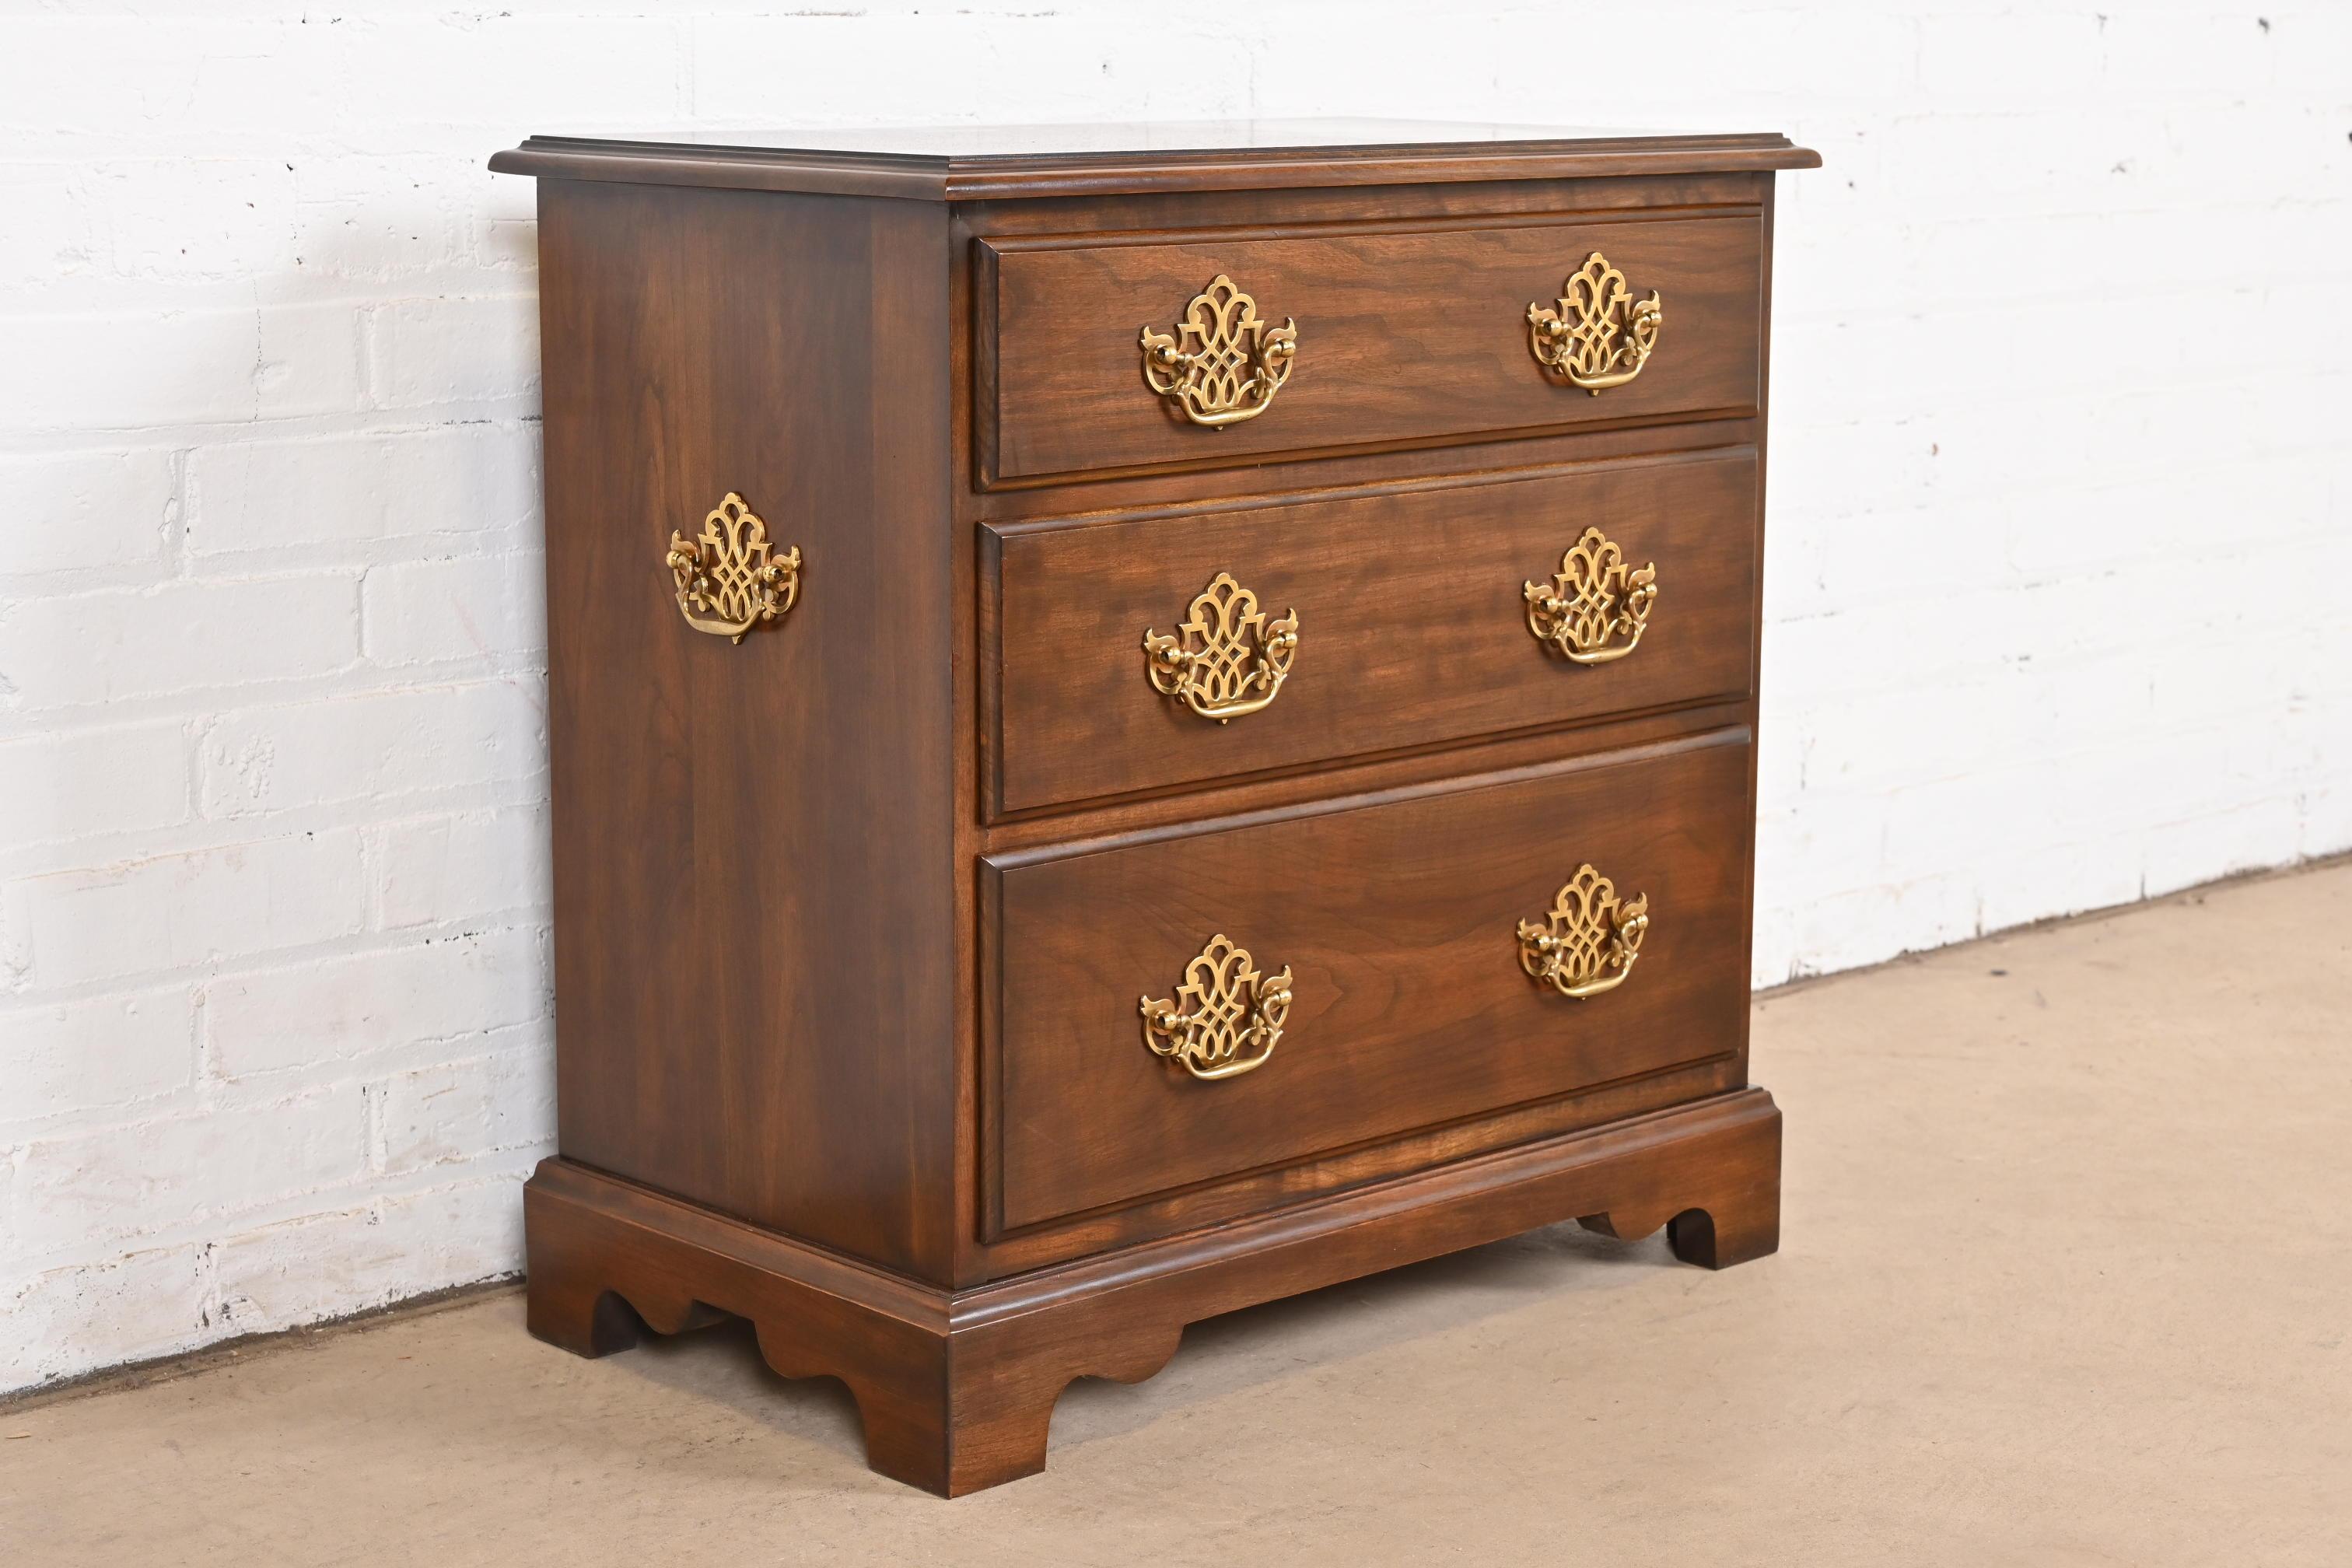 20th Century Harden Furniture Georgian Solid Cherry Wood Three-Drawer Bedside Chest For Sale